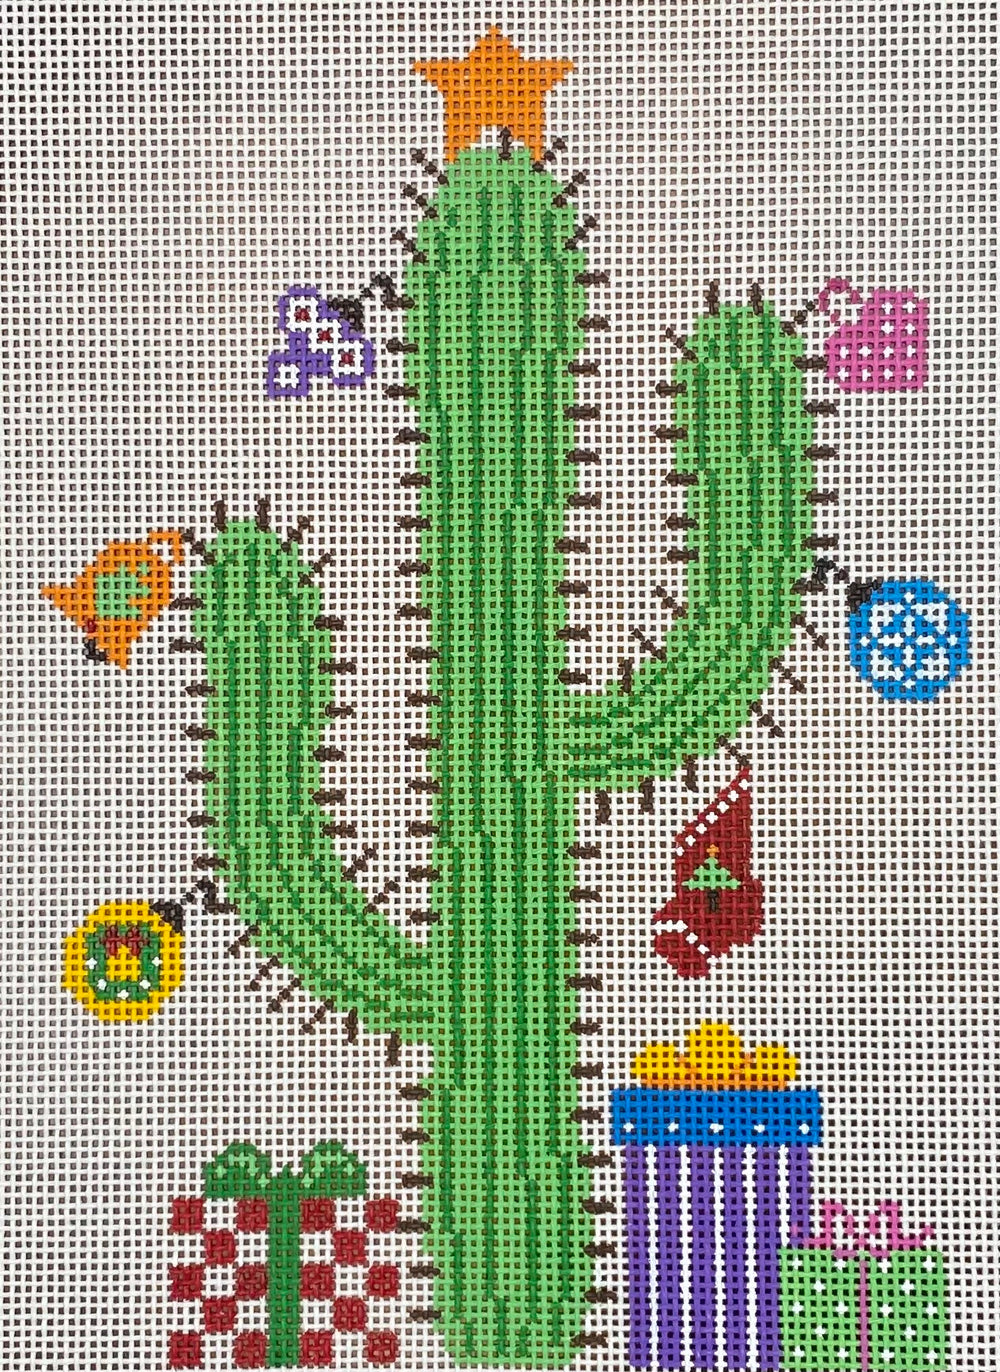 Cactus with Ornaments